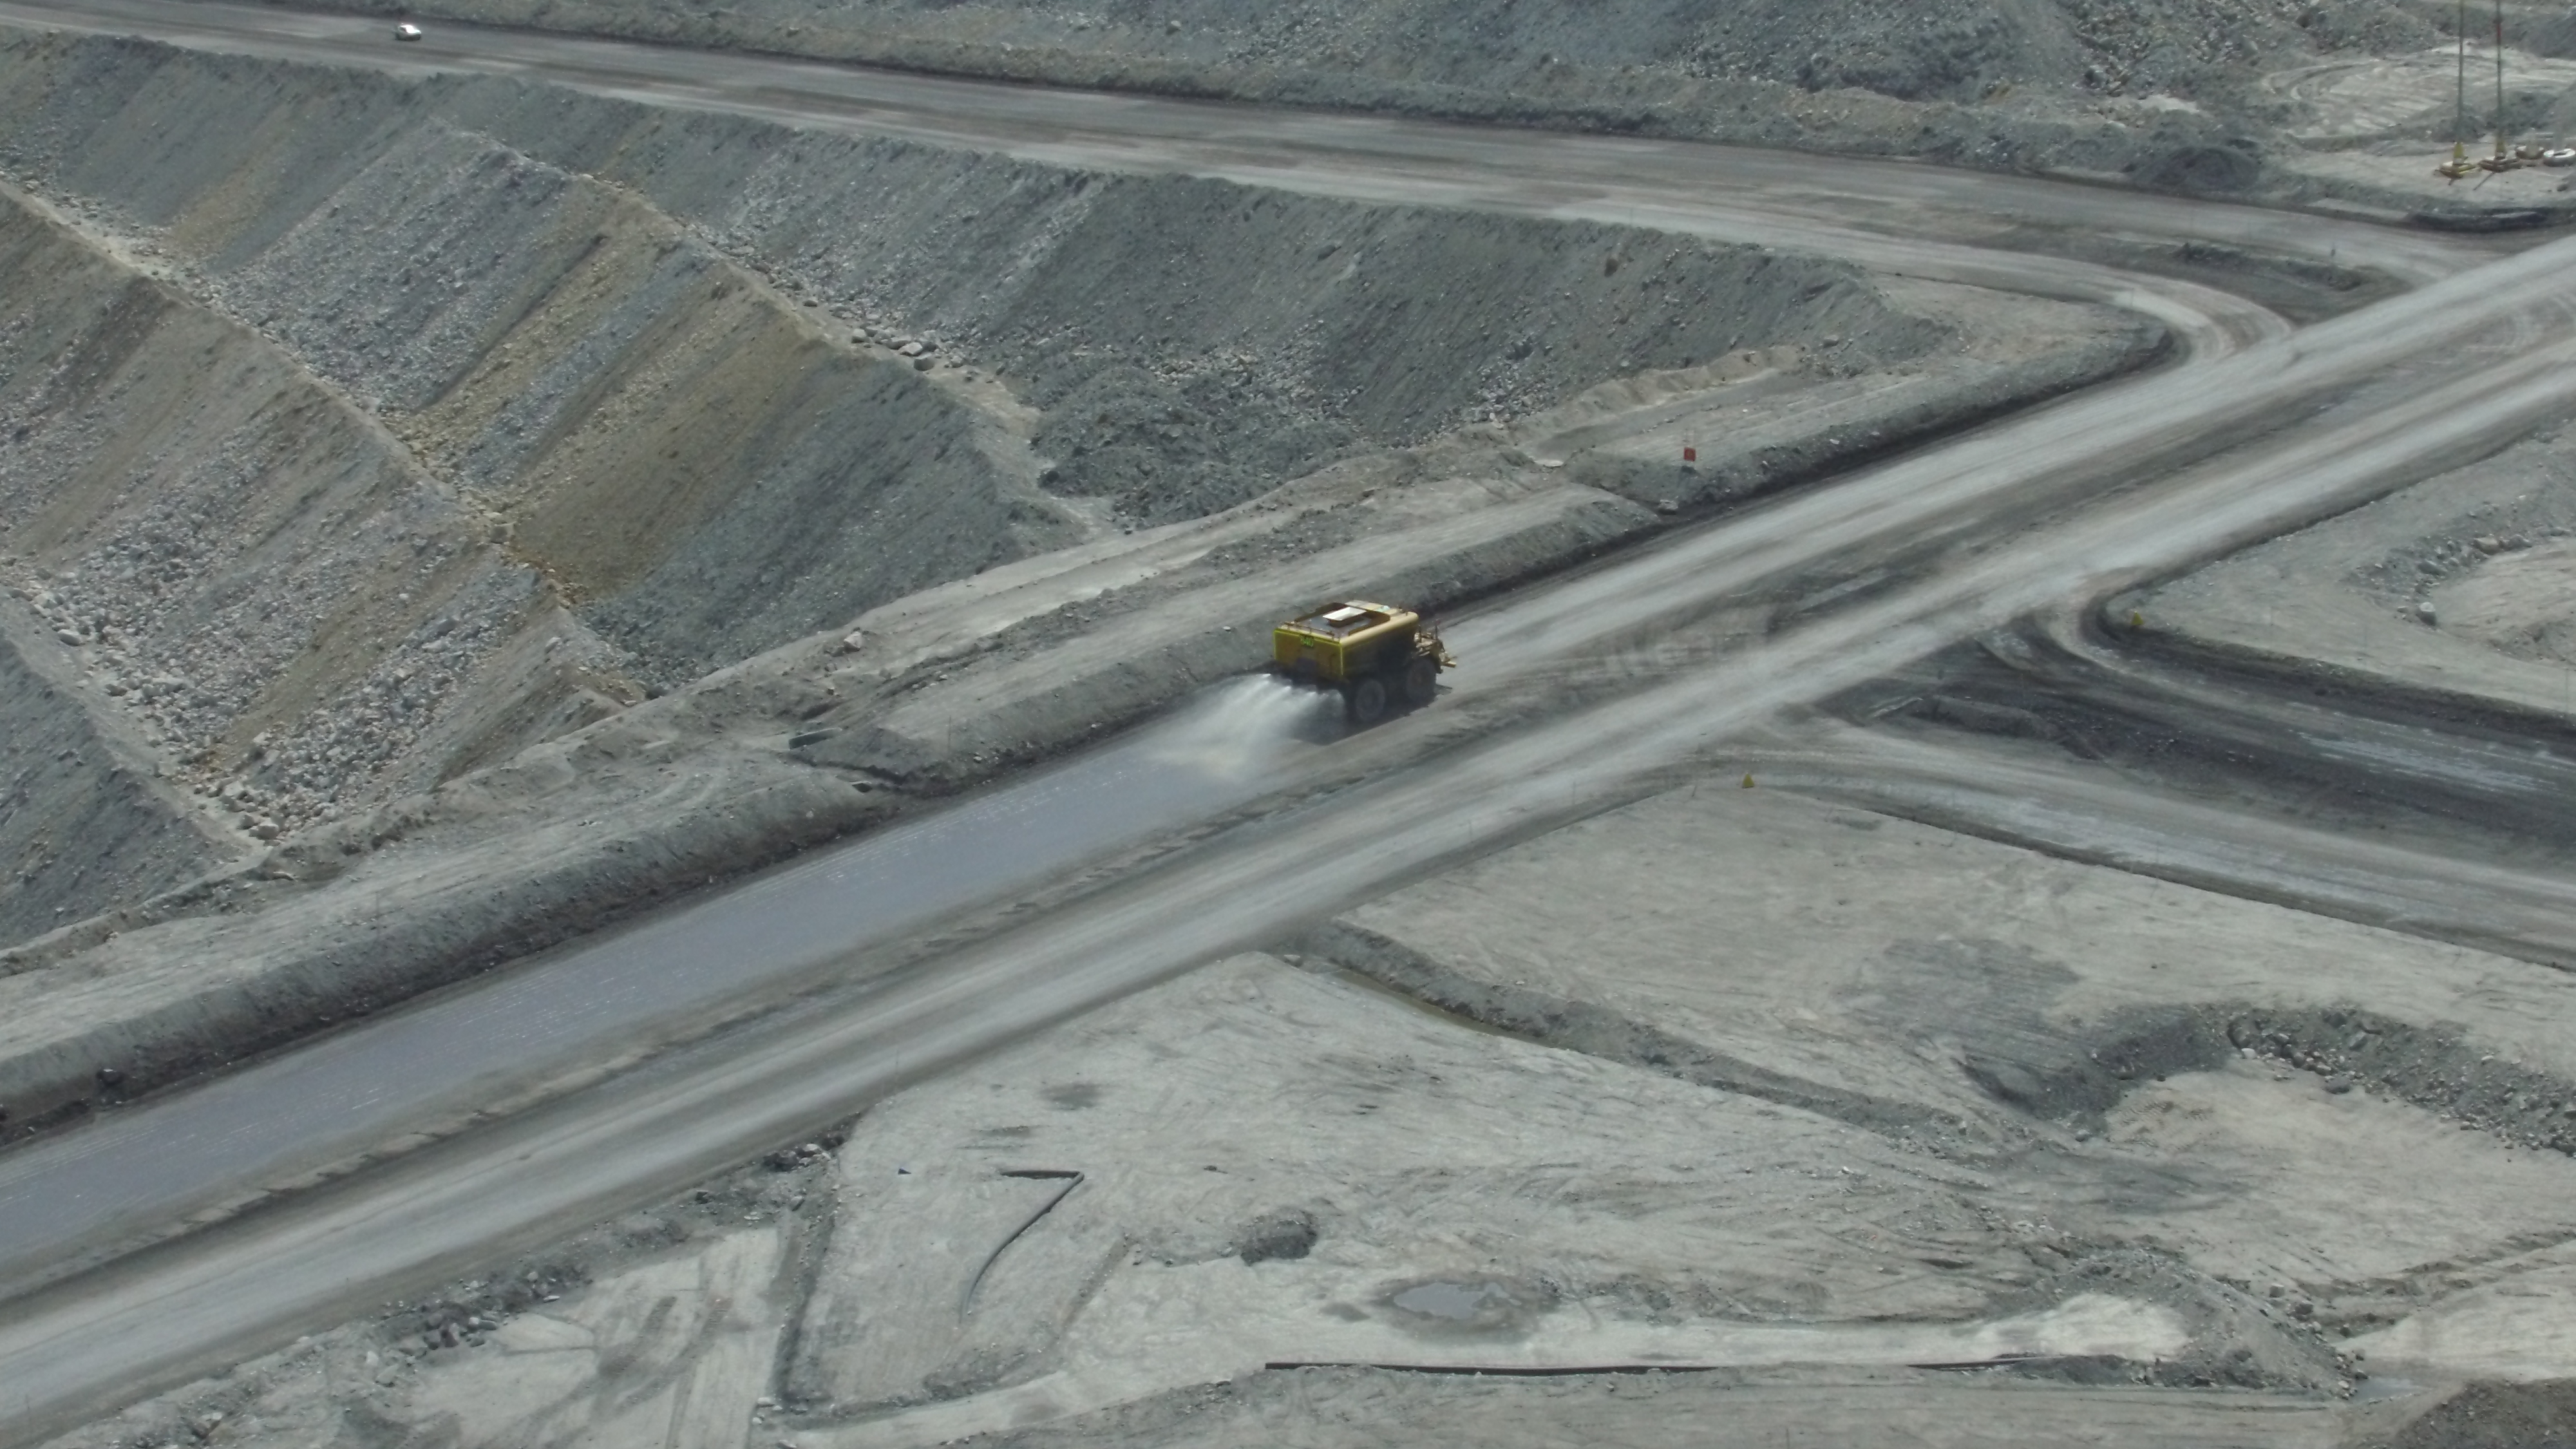 A truck drives in a mining area.